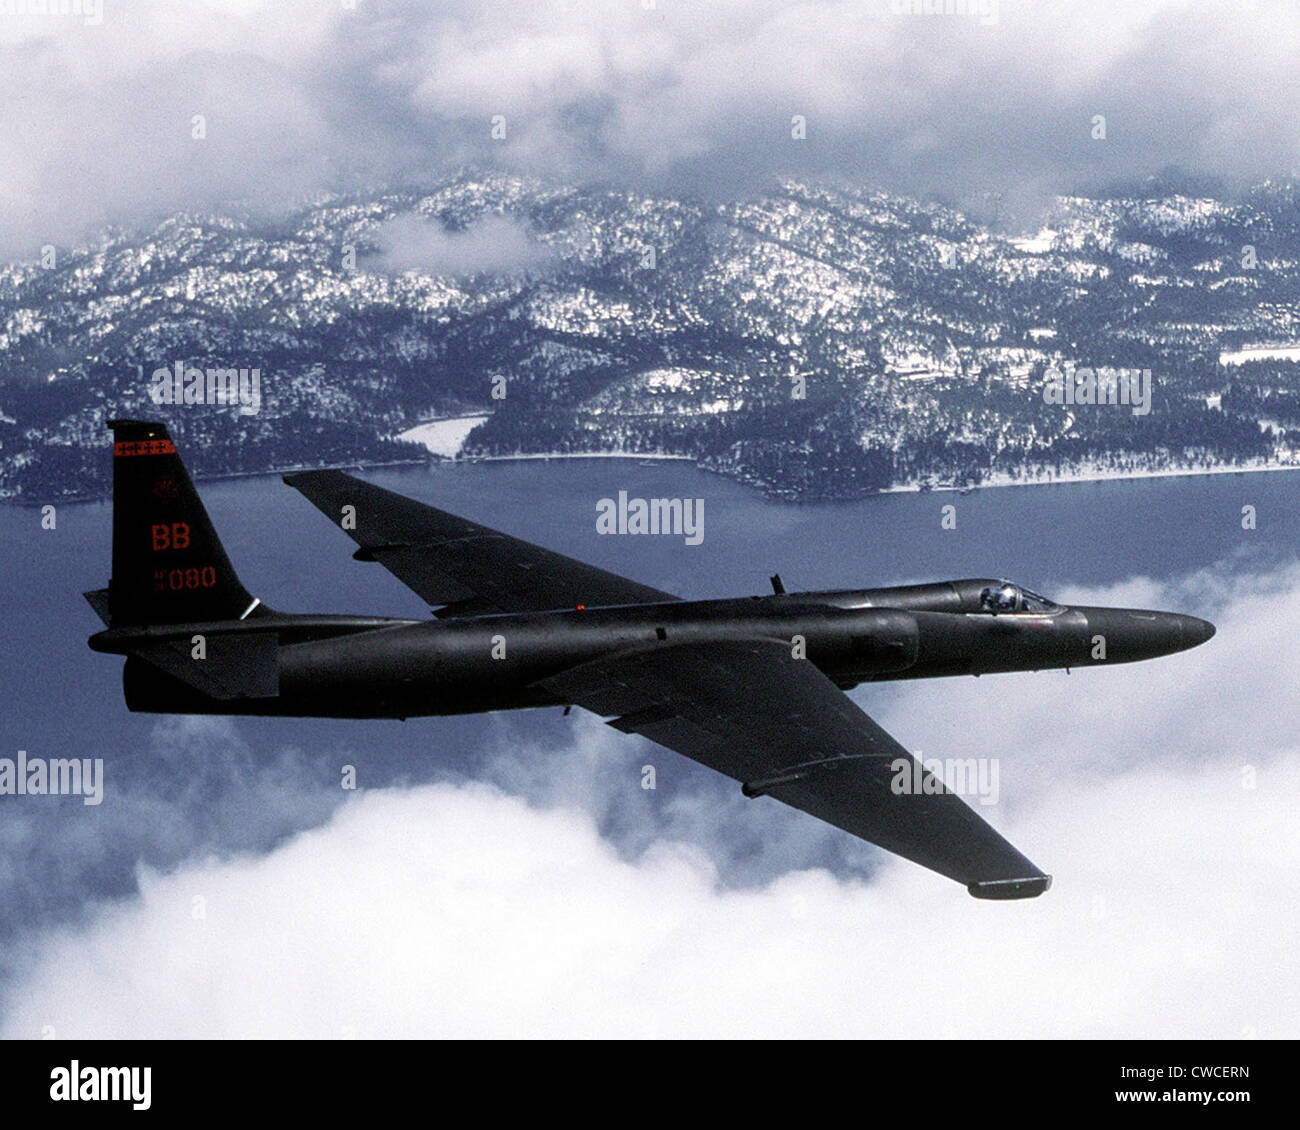 US Air Force U-2 high-altitude reconnaissance aircraft. It first flew in 1955 and remained a military secret until Francis Gary Stock Photo